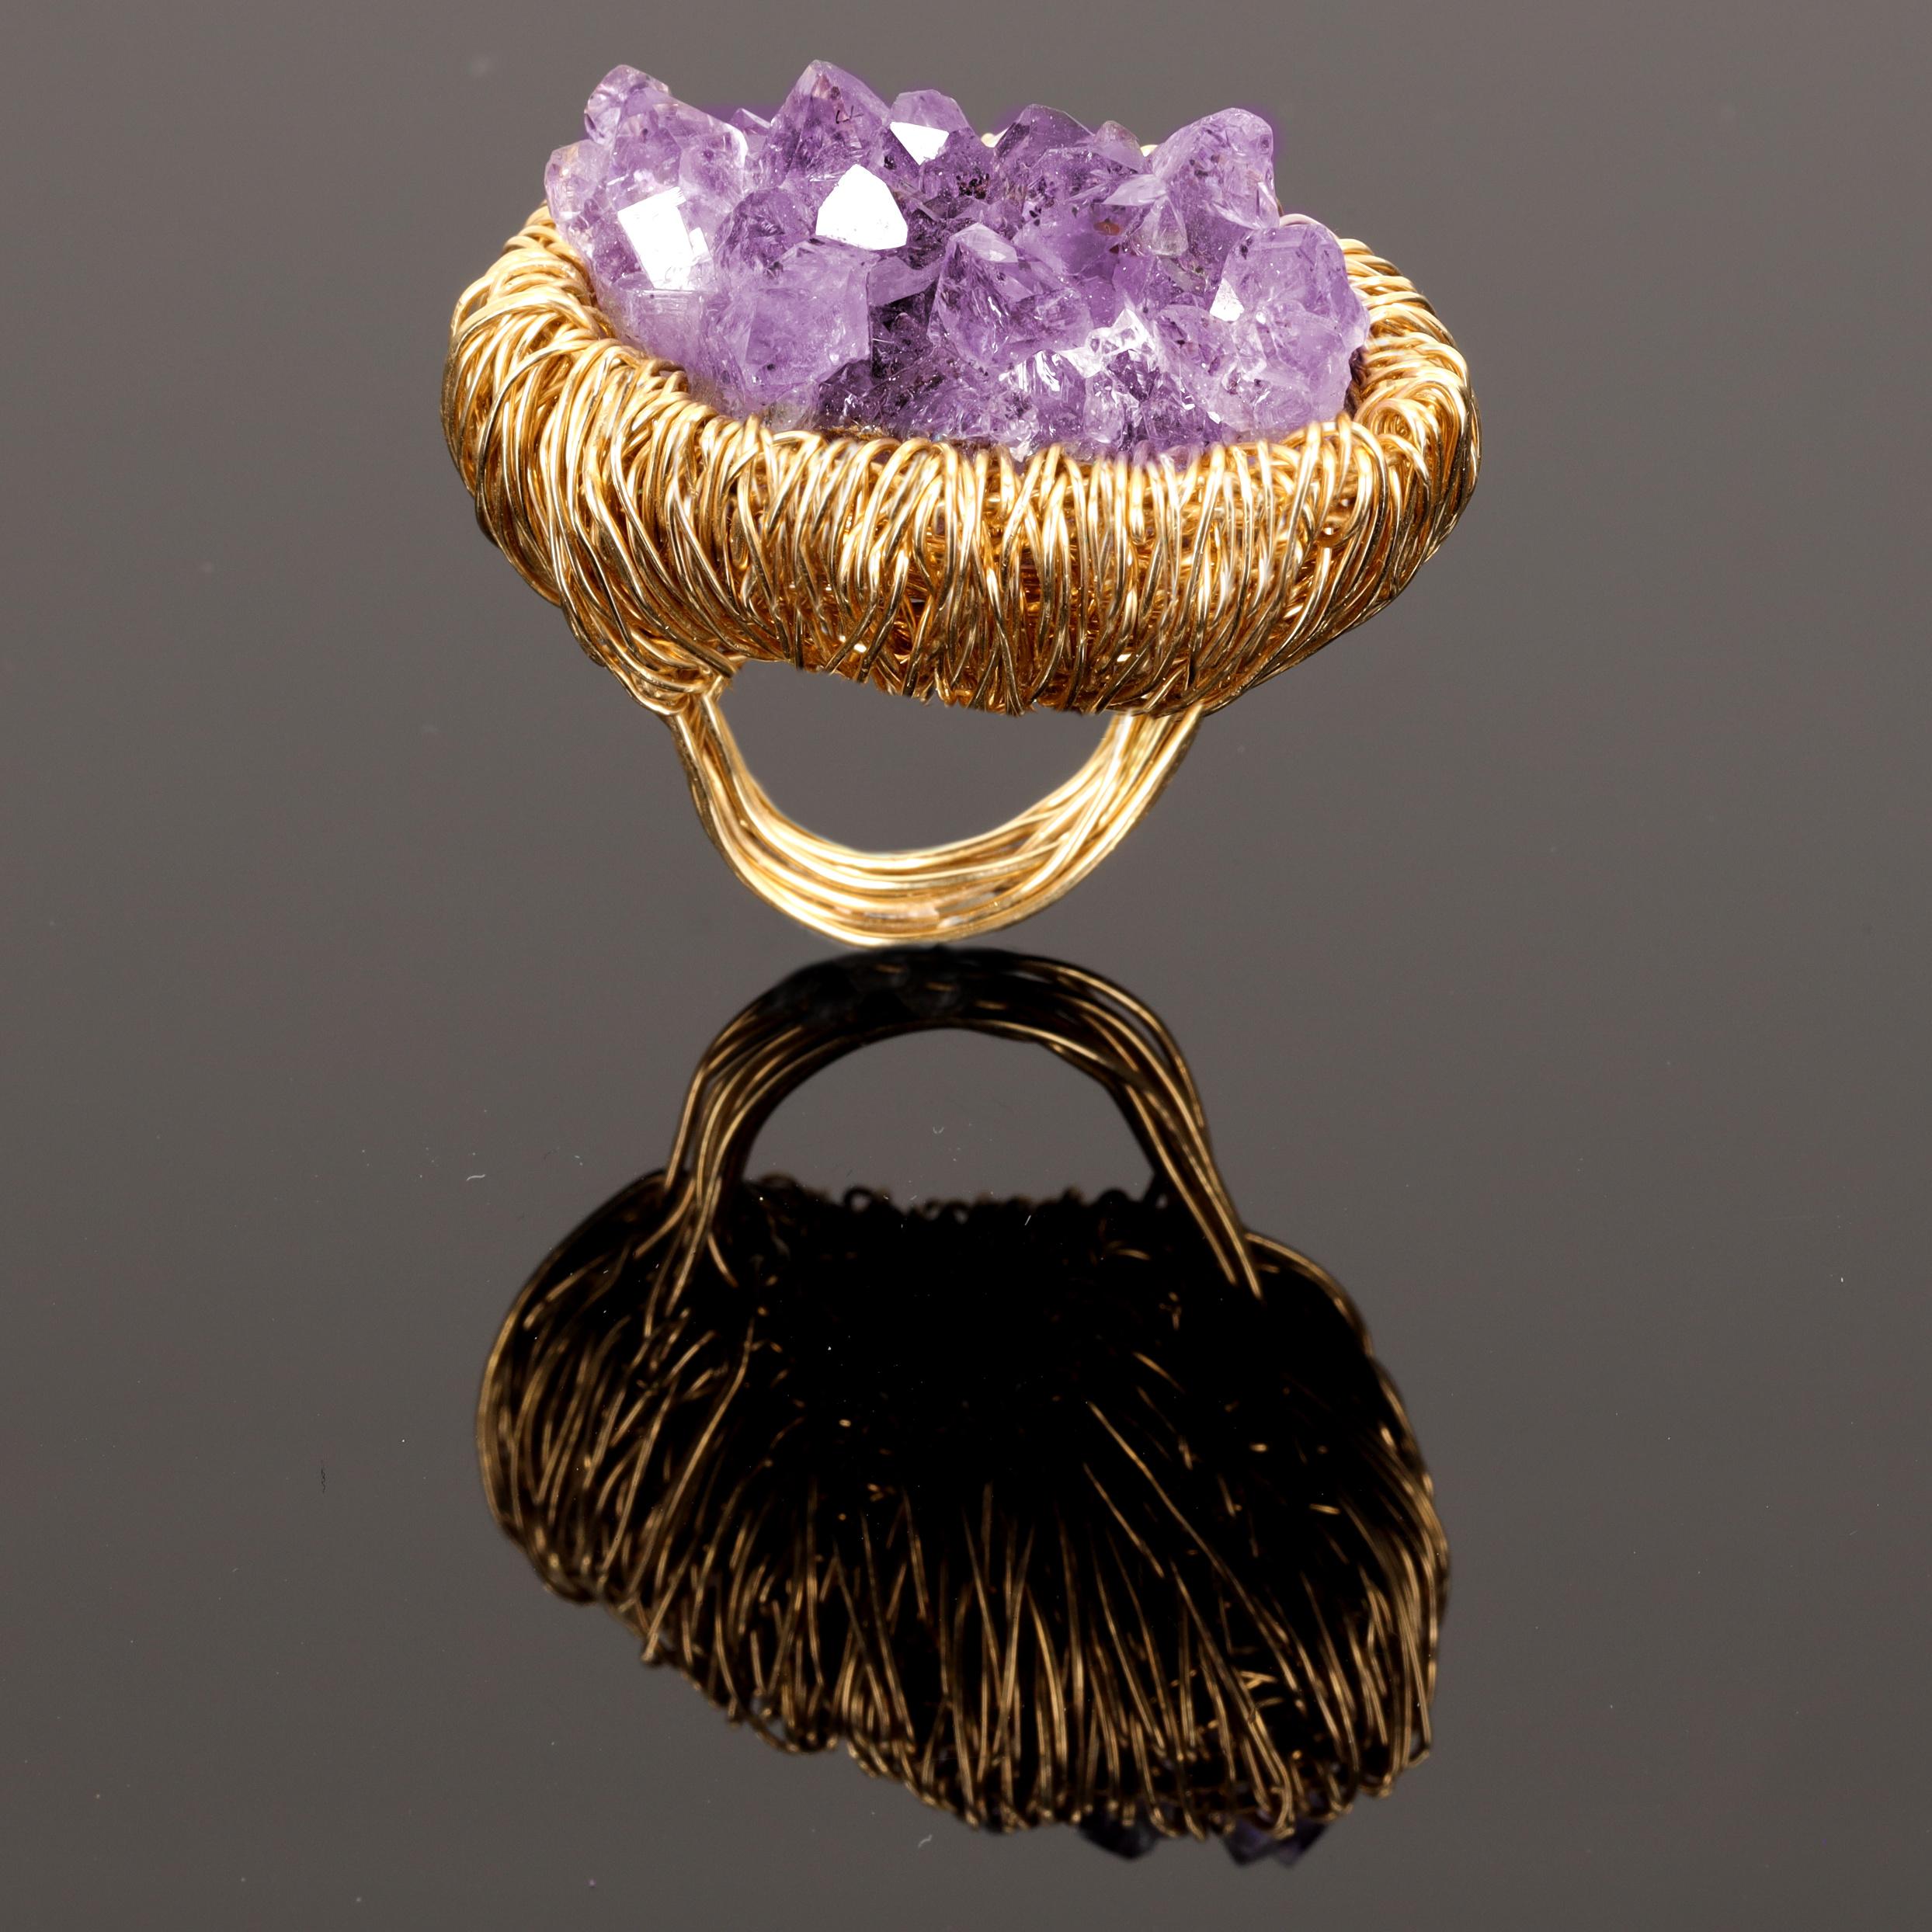 Purple Amethyst in 14 kt Gold F Statement Cocktail Ring by the artist For Sale 6